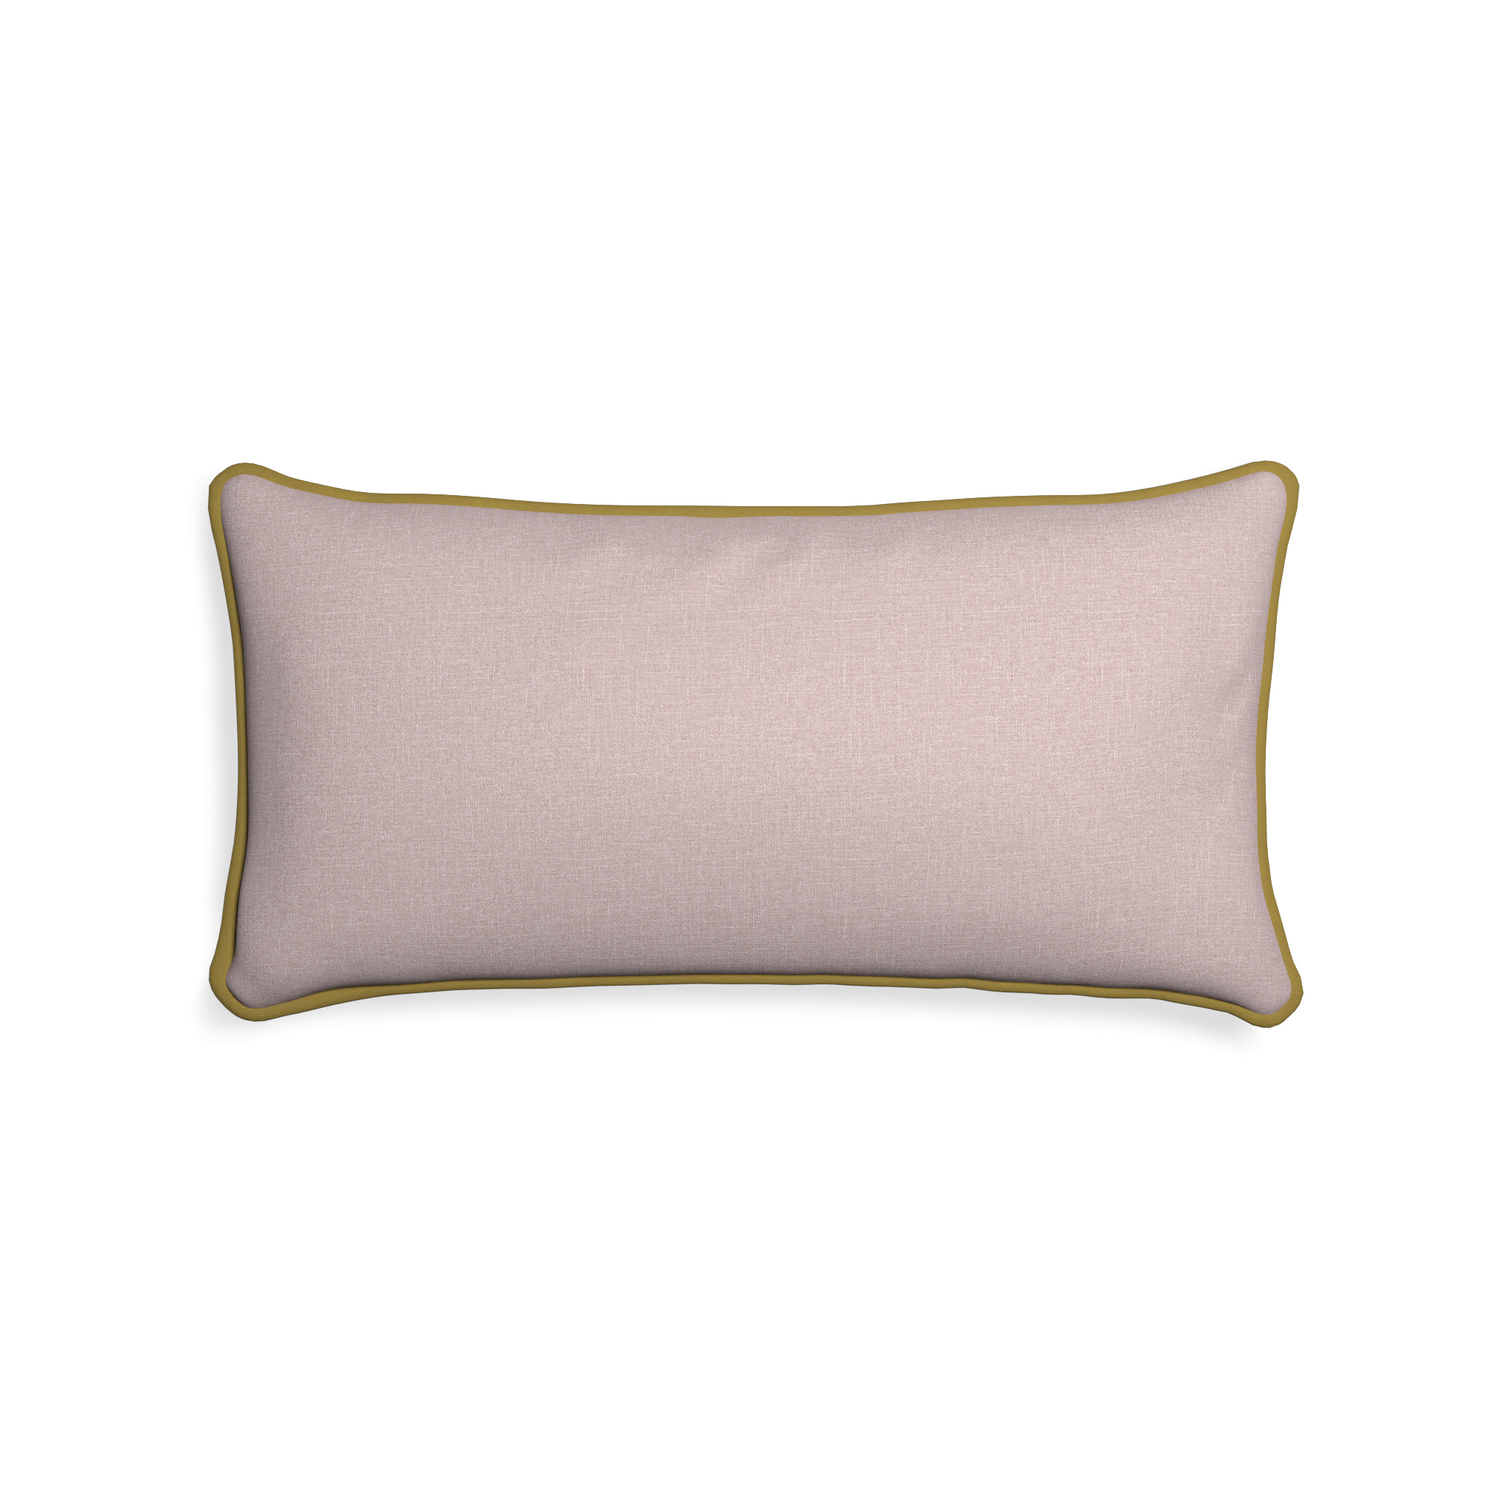 Midi-lumbar orchid custom mauve pinkpillow with c piping on white background